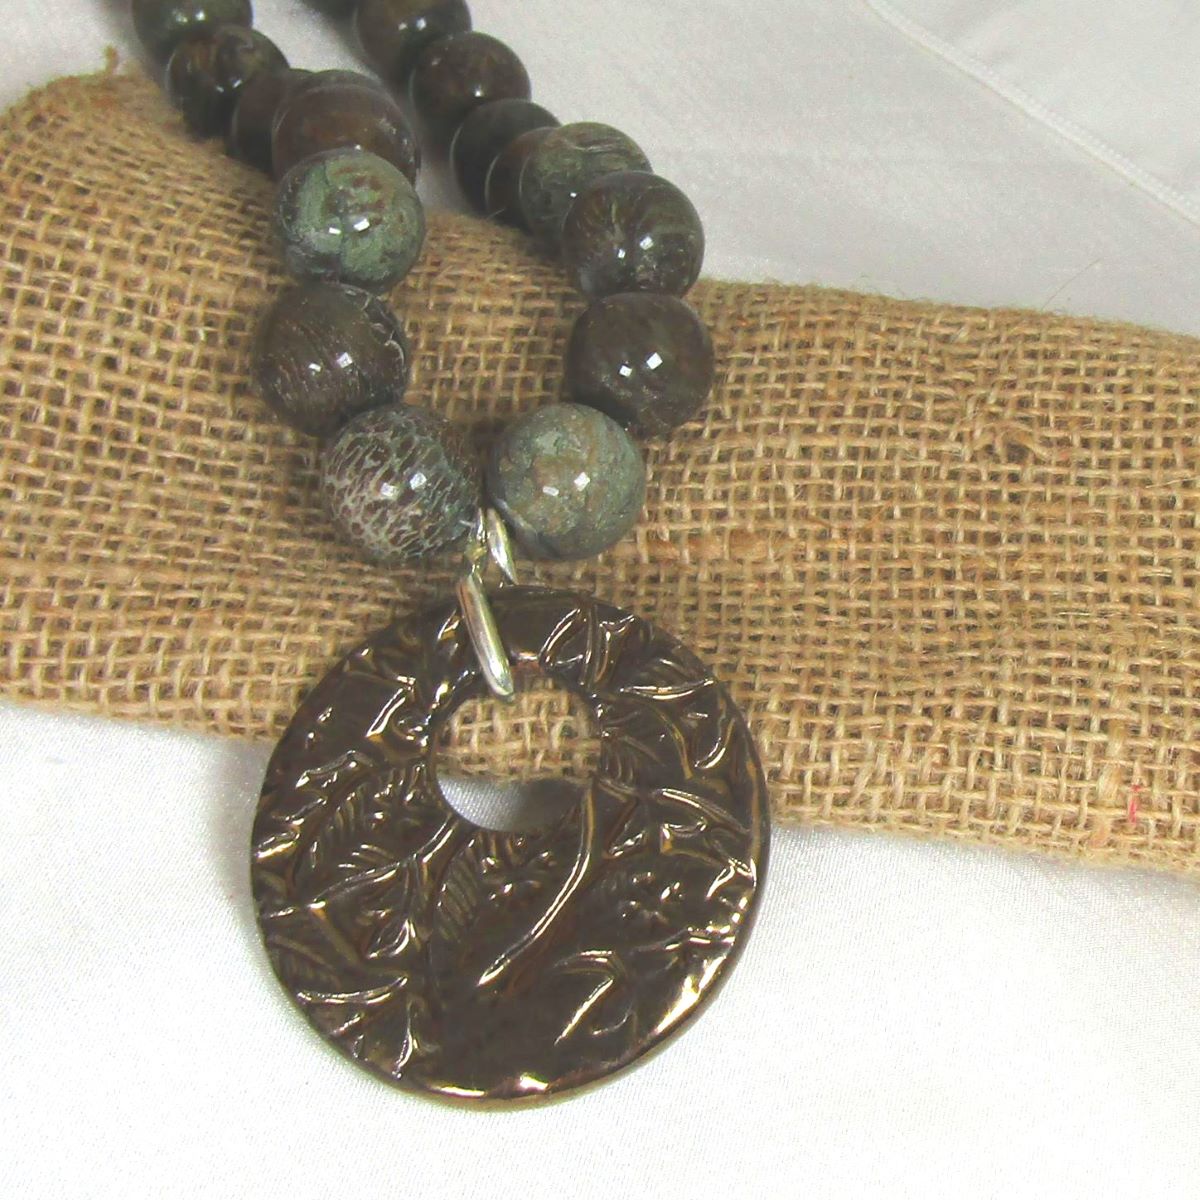 Green Gemstone Necklace with fair trade Big Pendant 